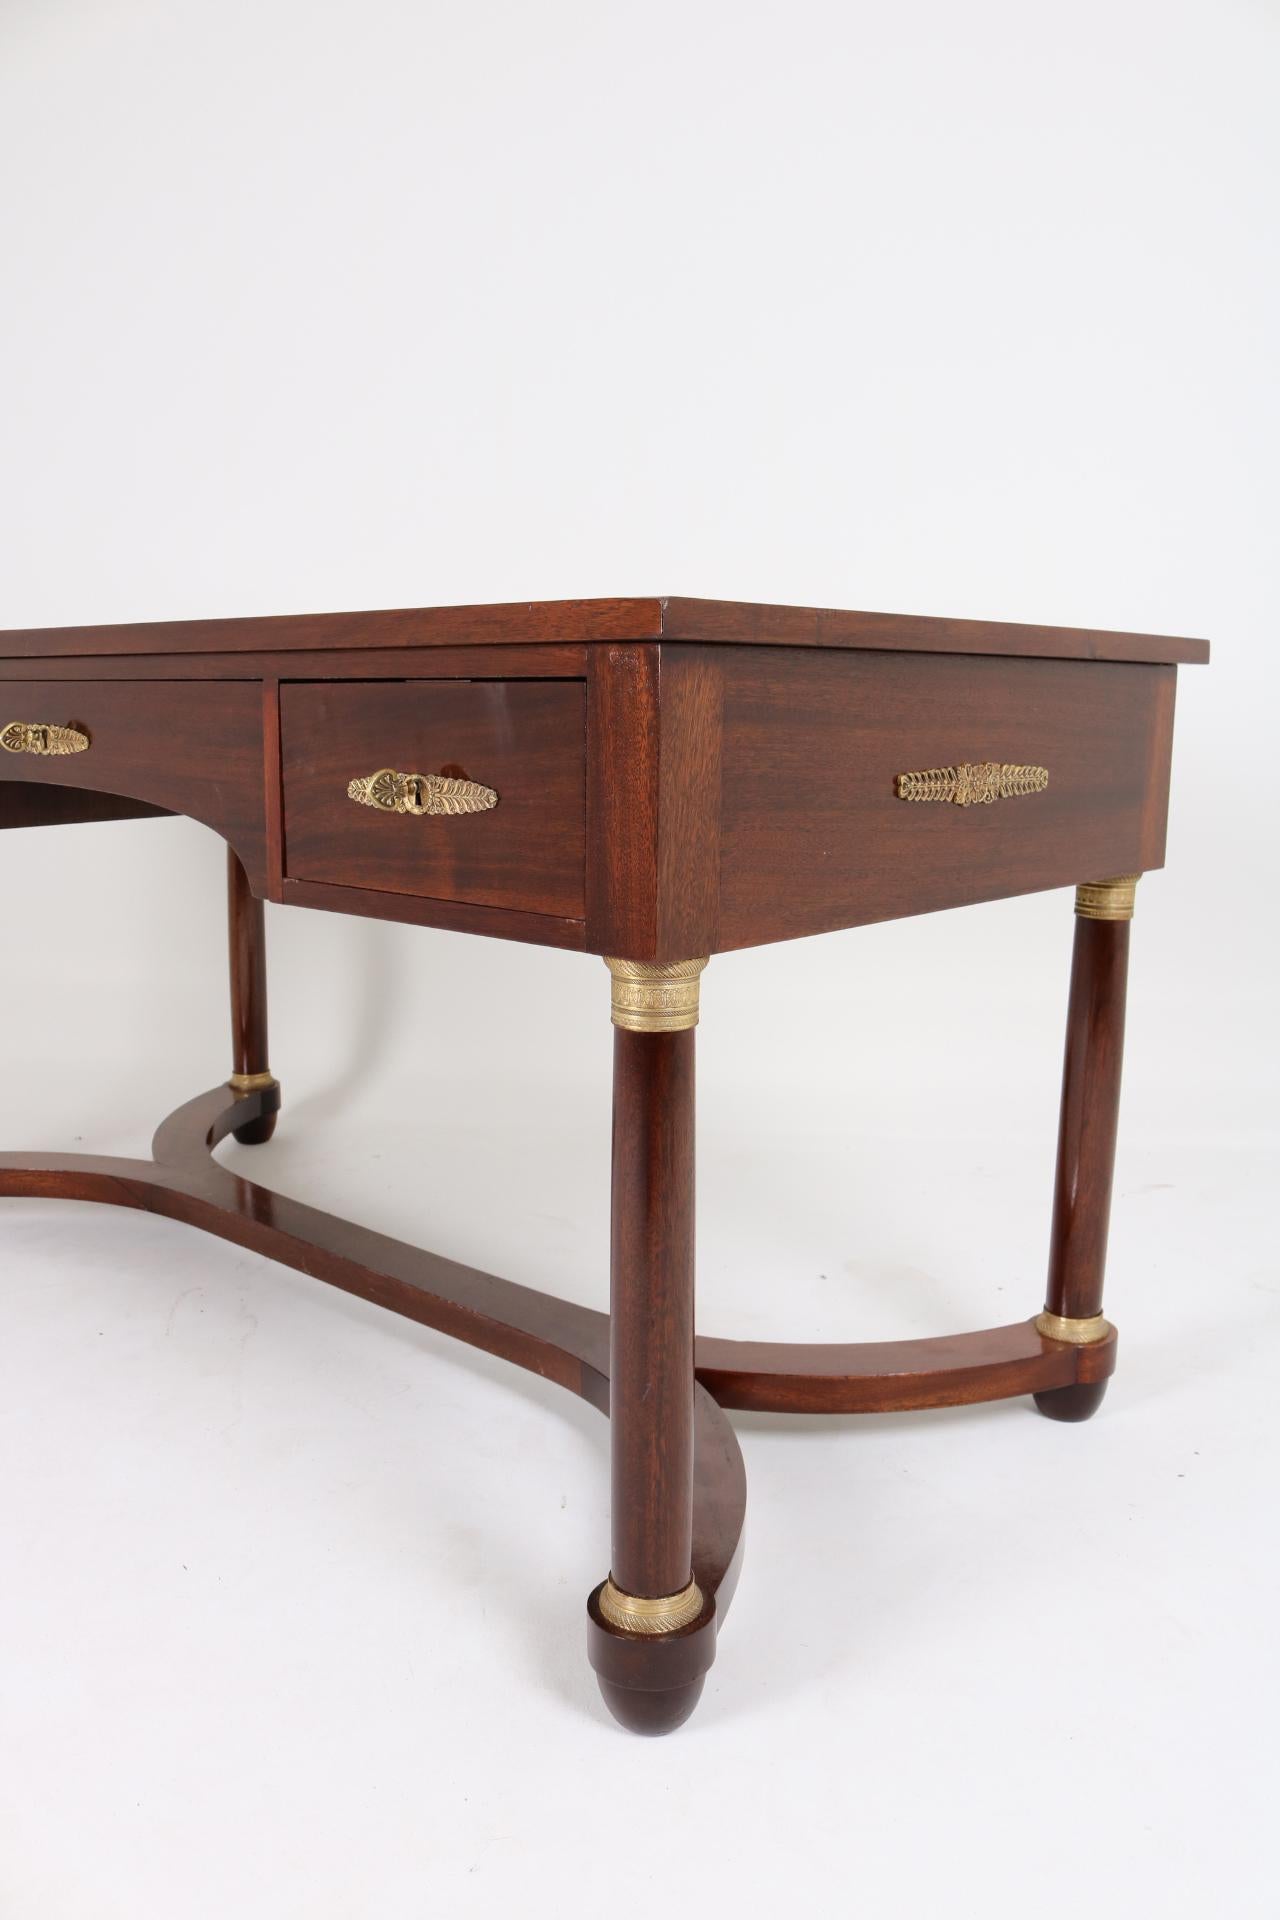 Polished Late 19th Century Empire Desk For Sale